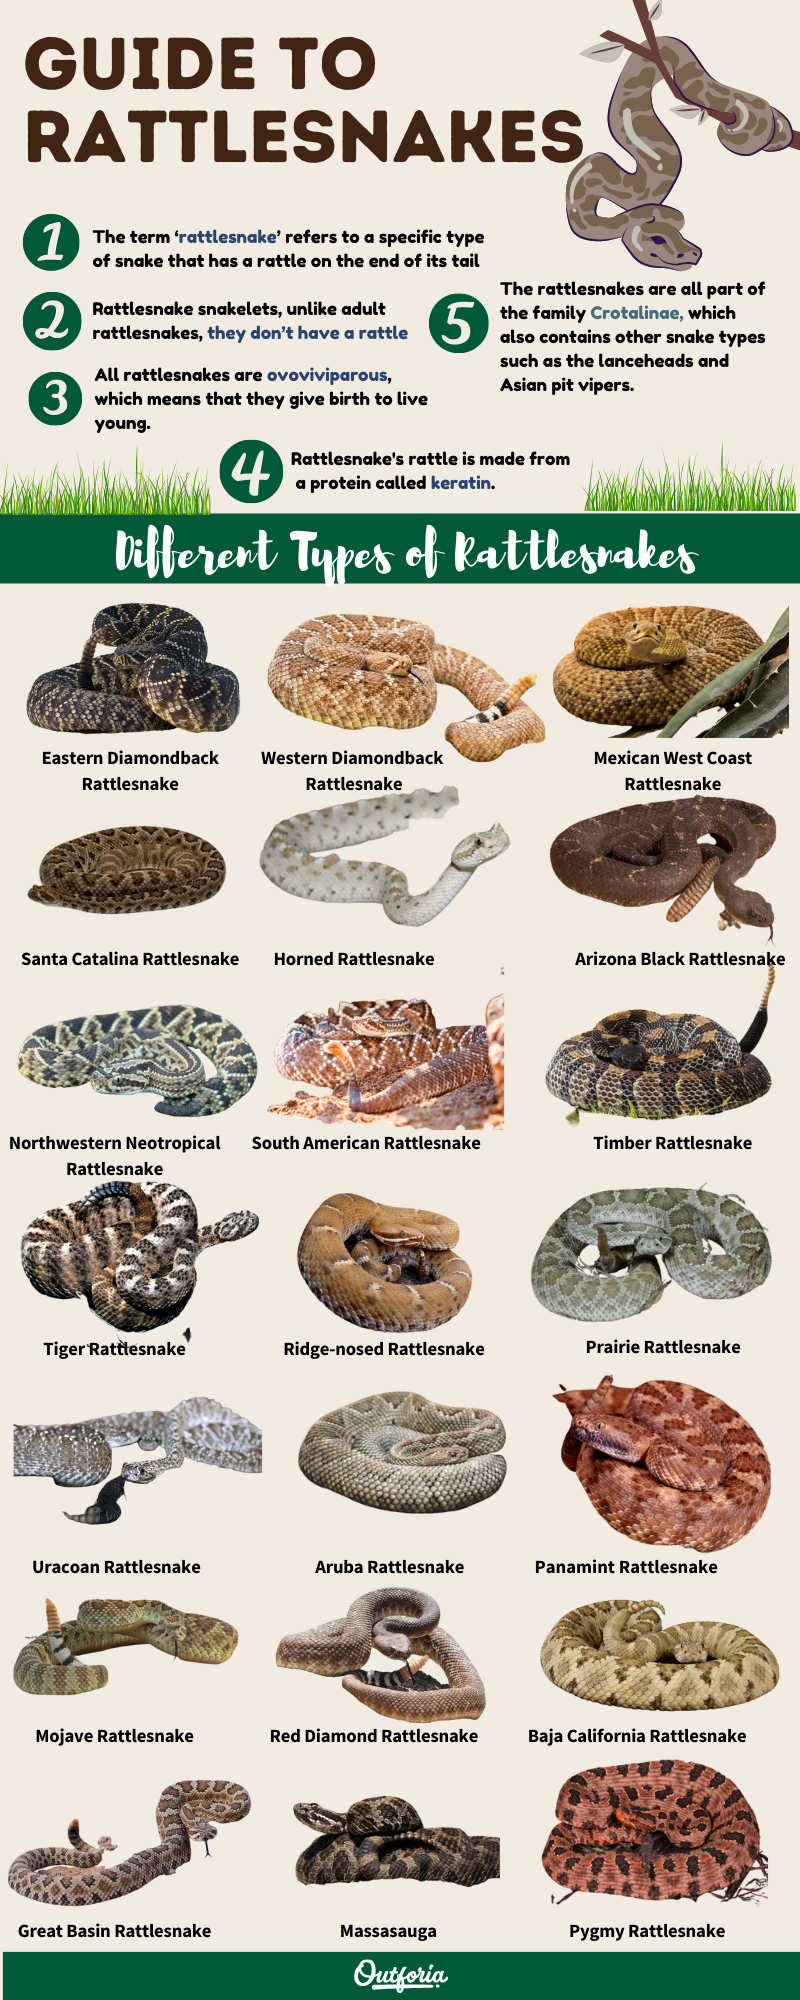 How Many Different Kinds of Rattlesnakes Are There?